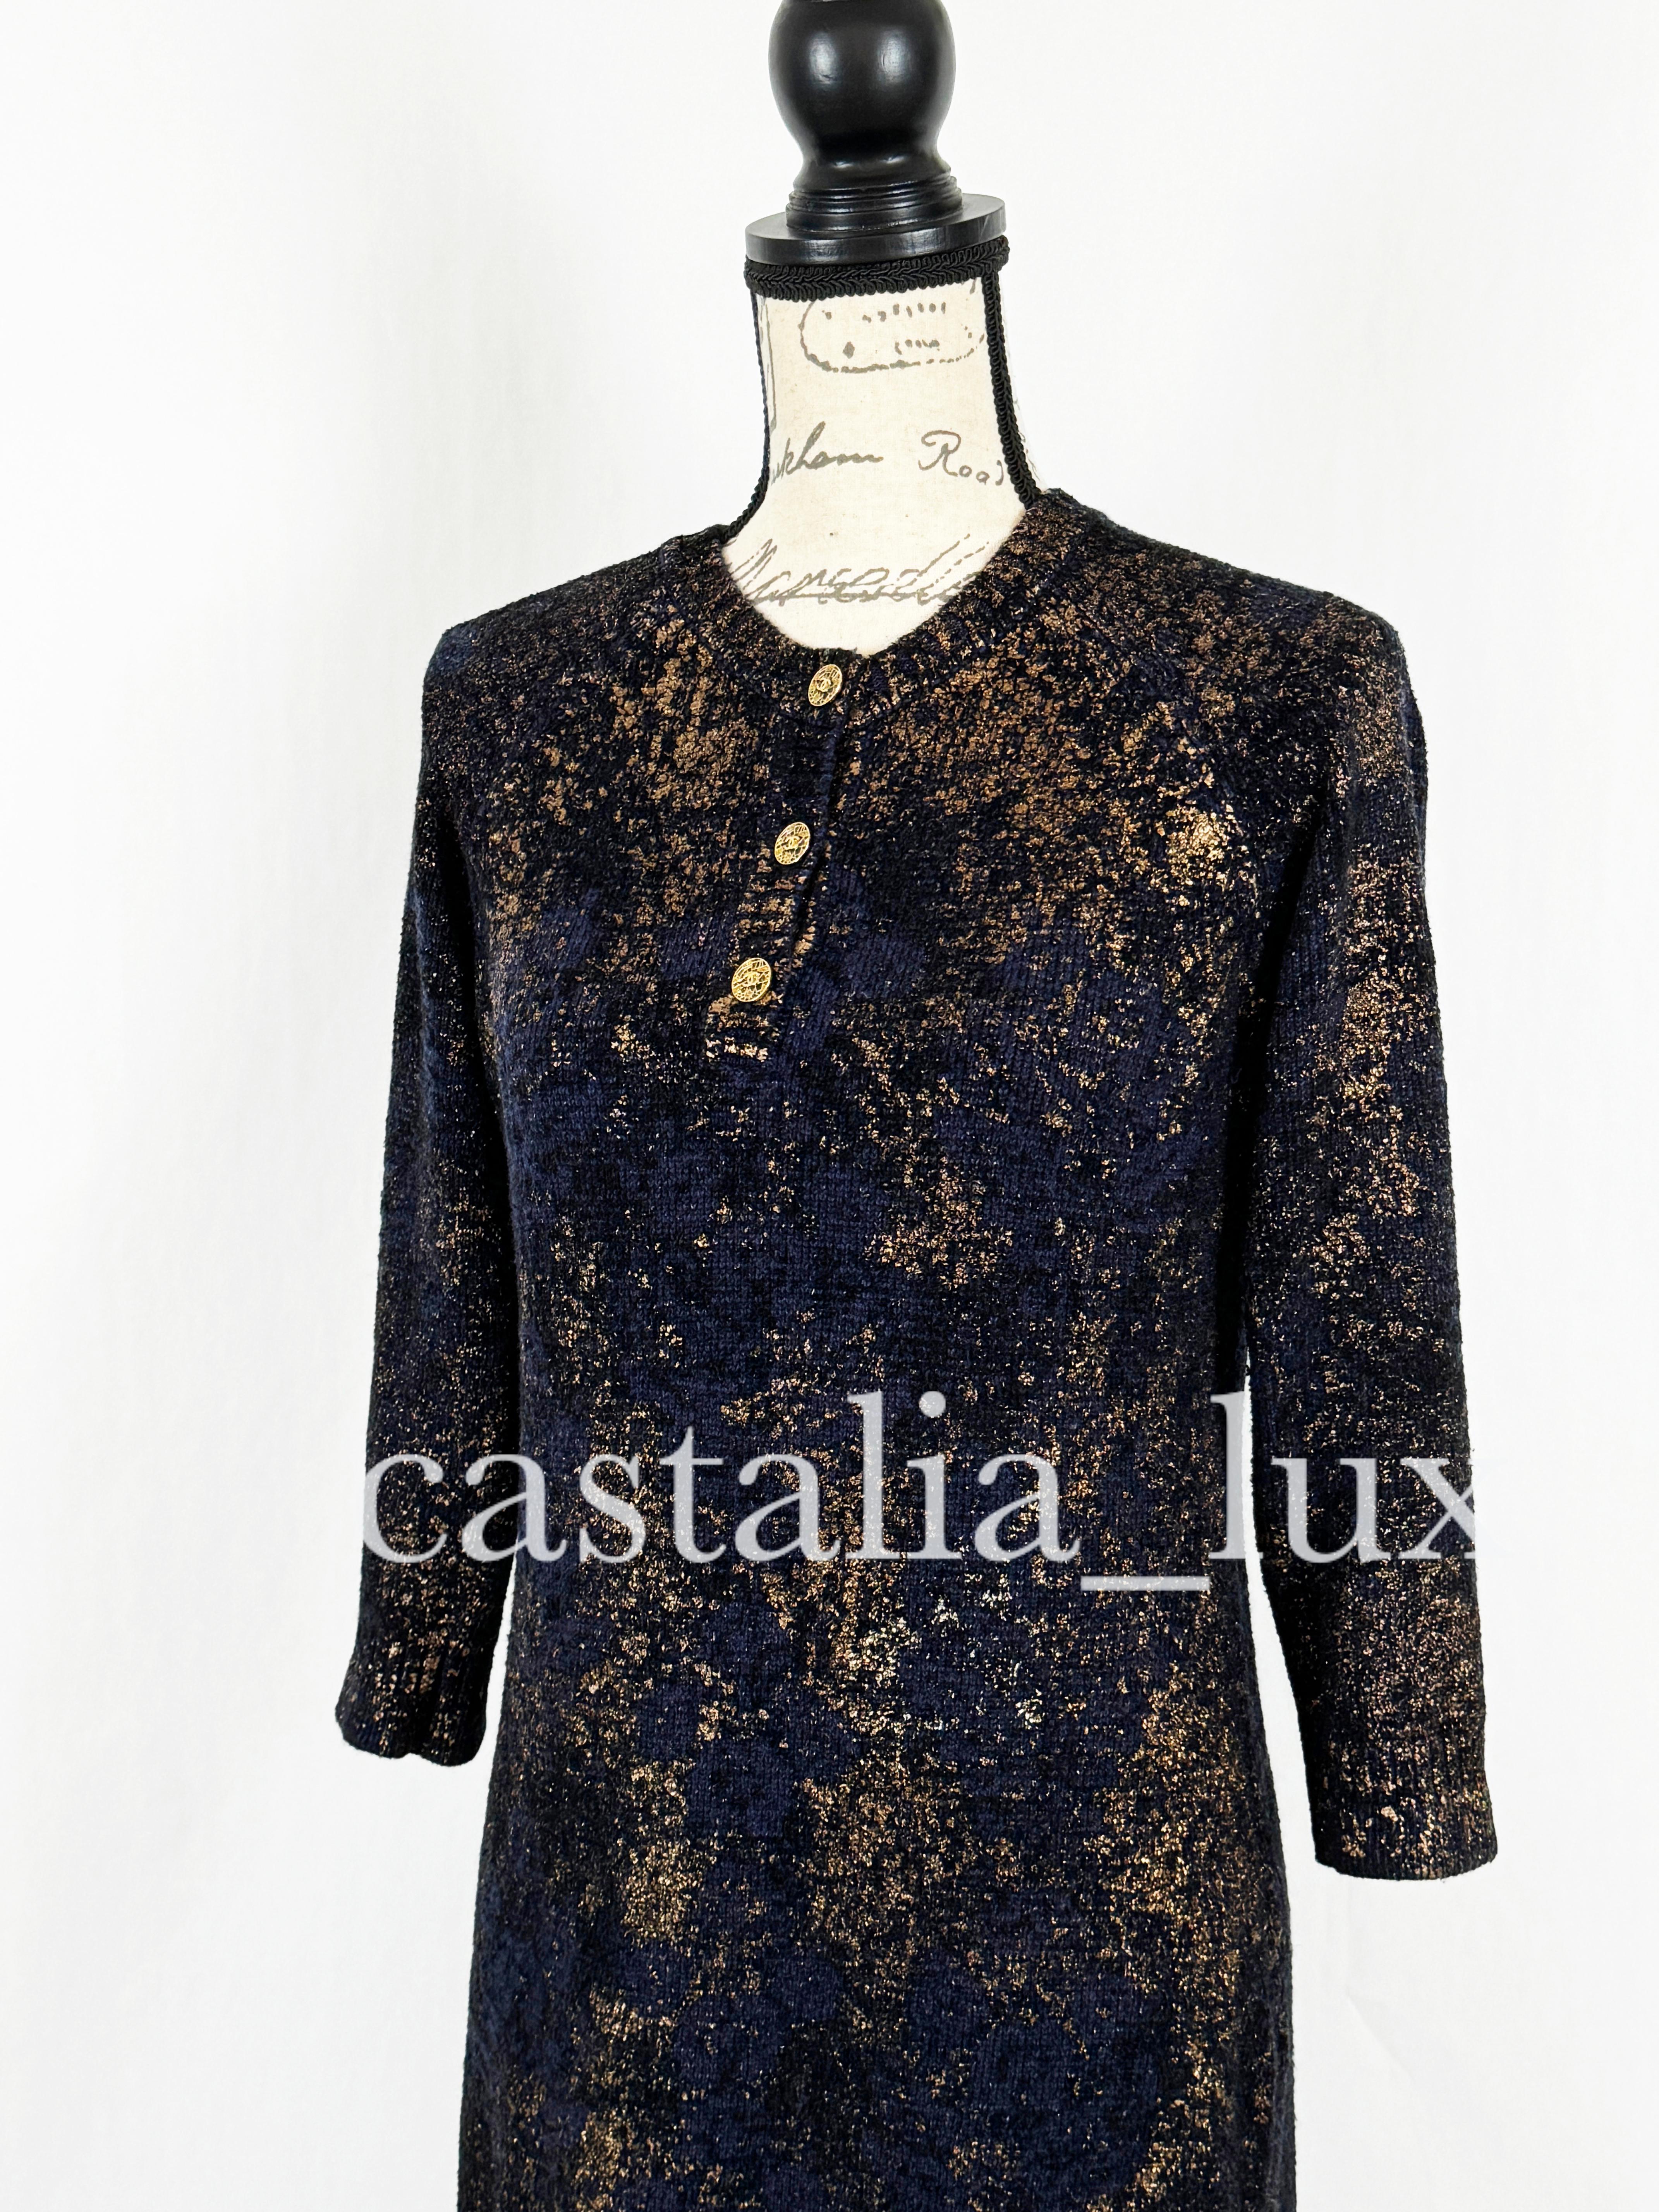 Chanel New Paris / Byzance CC Buttons Patinated Dress For Sale 5